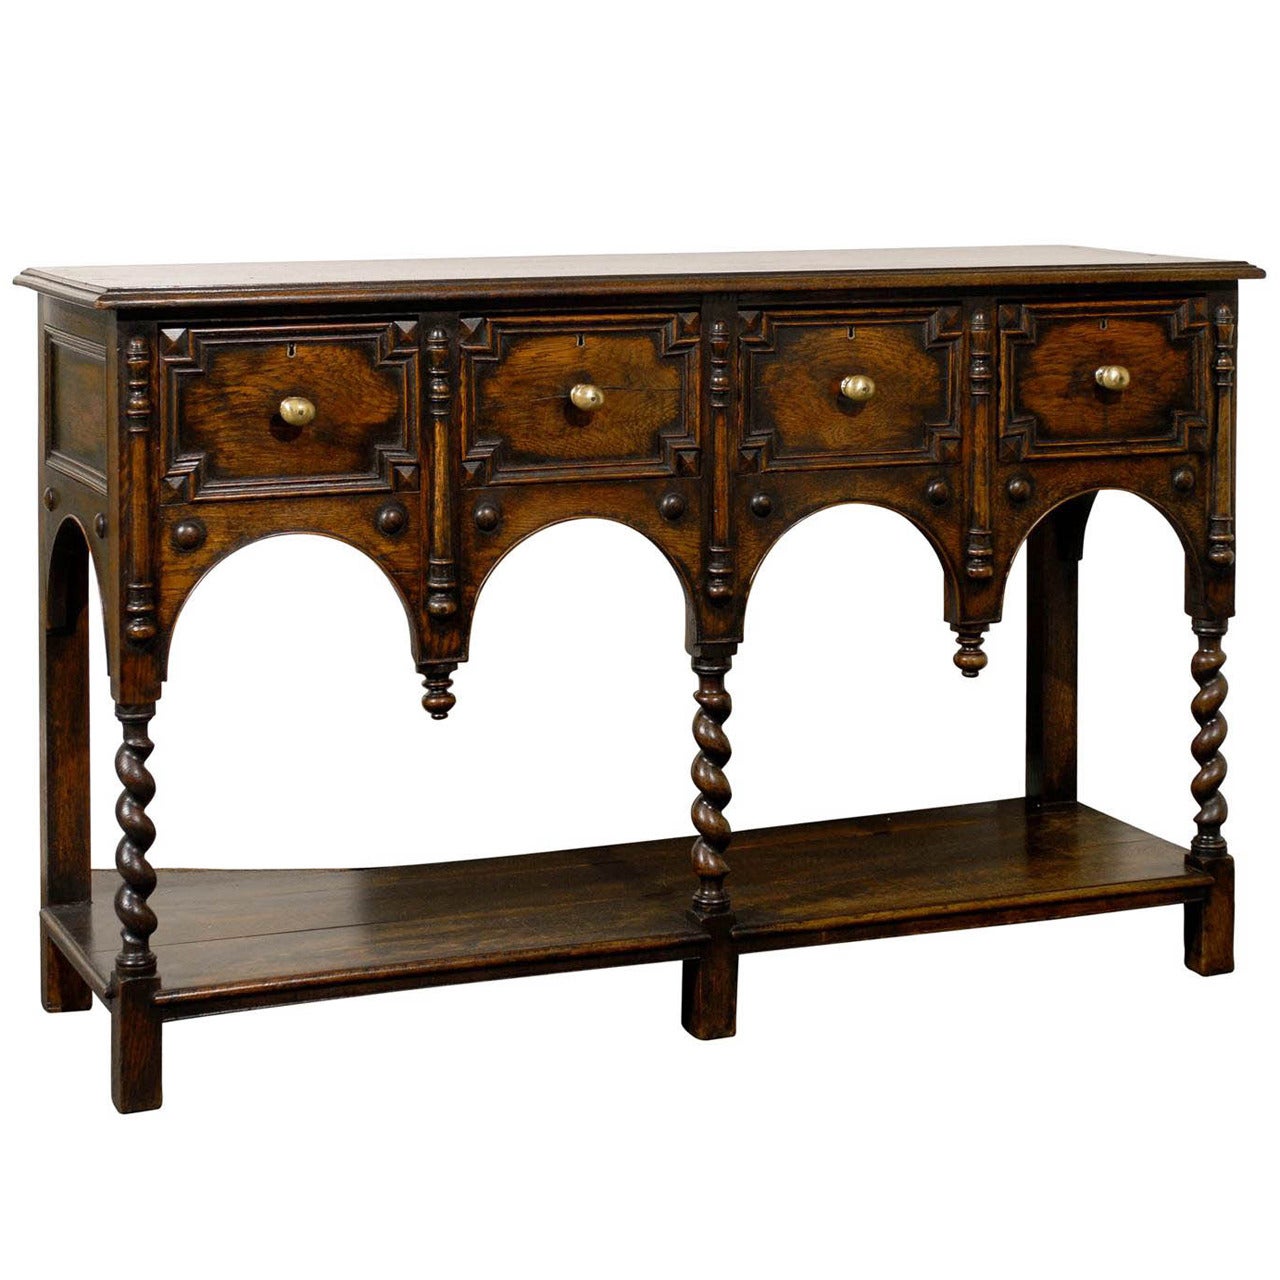 English 1880 Renaissance Revival Server with Four Drawers and Barley Twist Legs